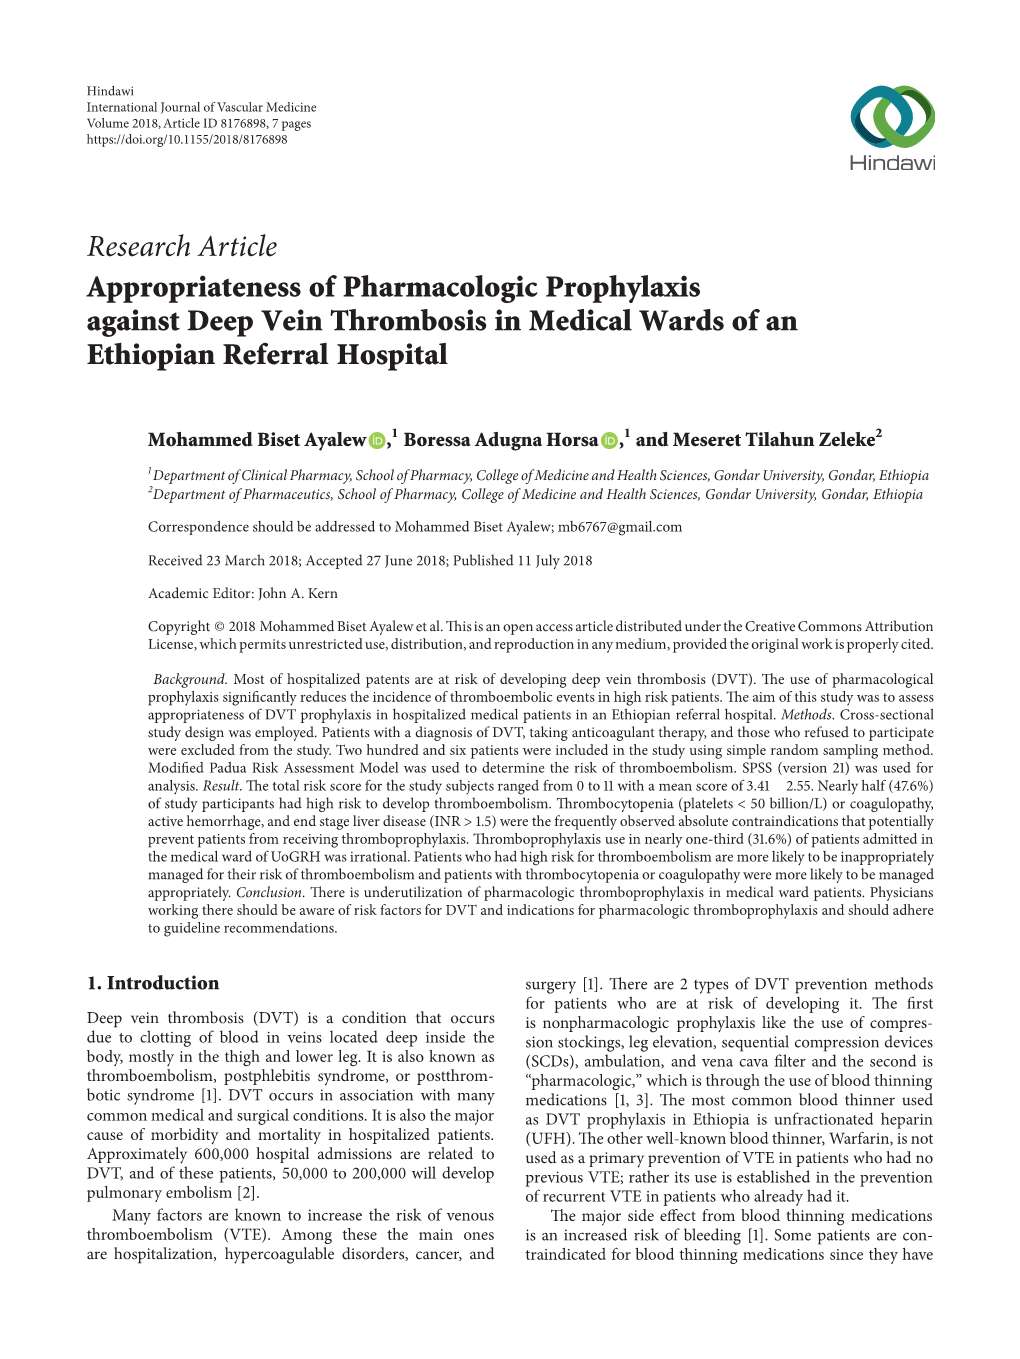 Research Article Appropriateness of Pharmacologic Prophylaxis Against Deep Vein Thrombosis in Medical Wards of an Ethiopian Referral Hospital